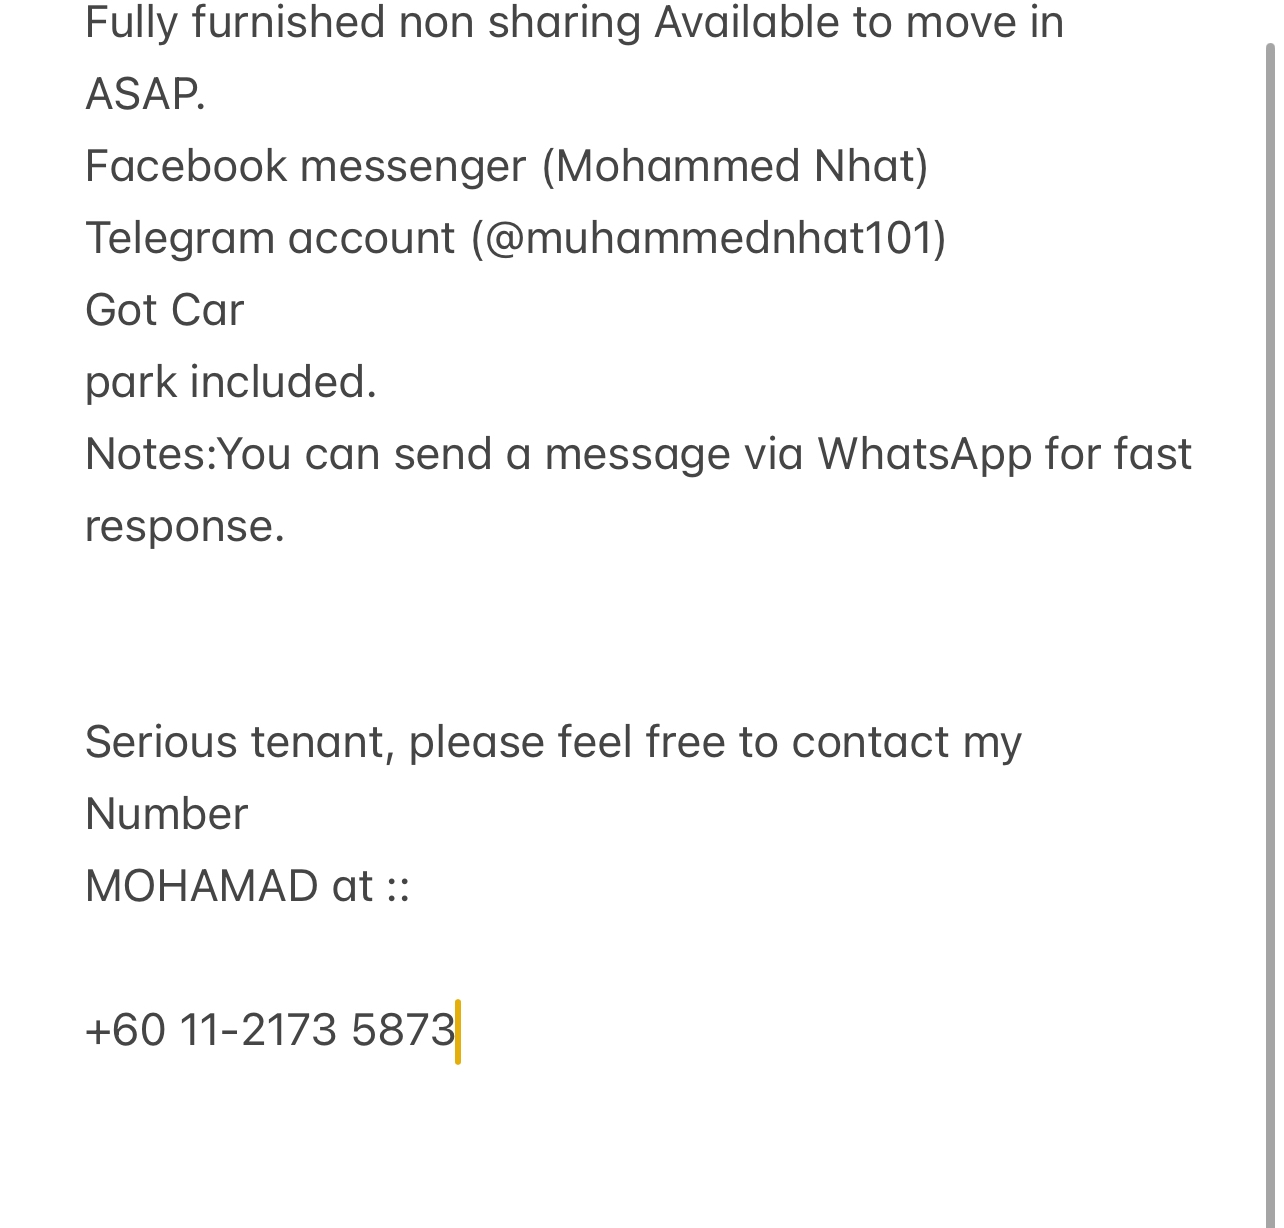 room for rent, studio, persiaran denai nusantara, Send the owner a message on WhatsApp/facebook if you want to RENT the unit facebook (Mohammed Nhat)&Telegram(@muhammednhat101) Fully furnished non sharing :(comfortable)